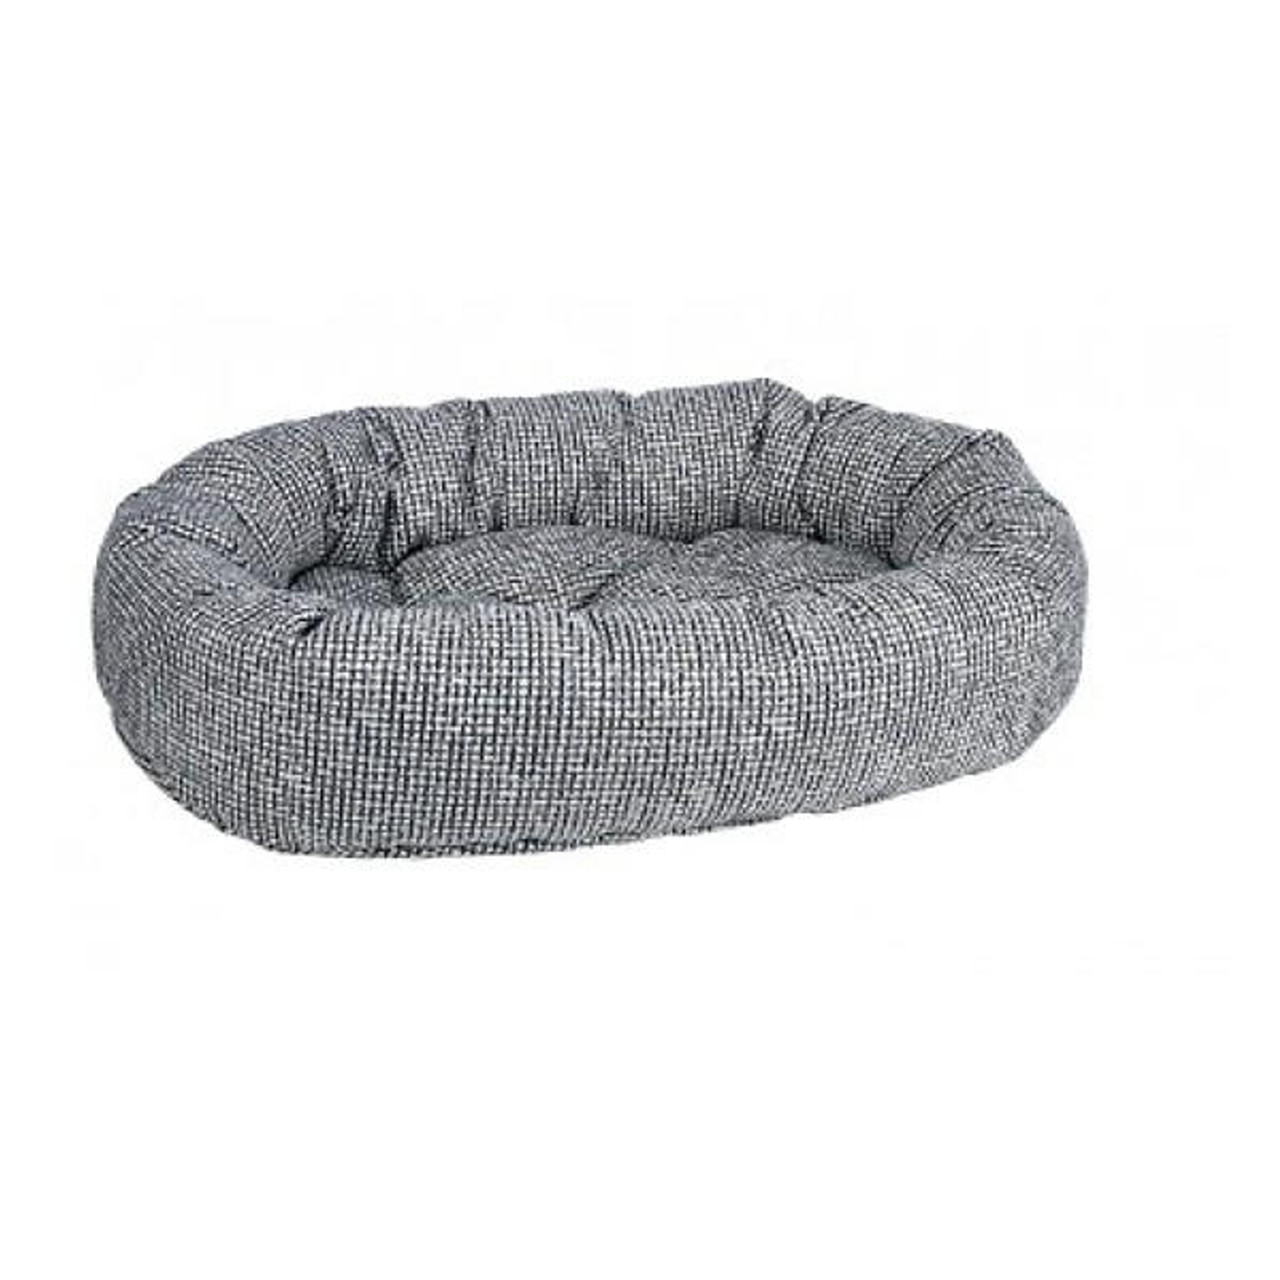 https://cdn11.bigcommerce.com/s-dppmv5/images/stencil/1280x1280/products/53964/111847/bowsers-lakeside-chenille-donut-pet-dog-bed__91128.1663902811.jpg?c=2